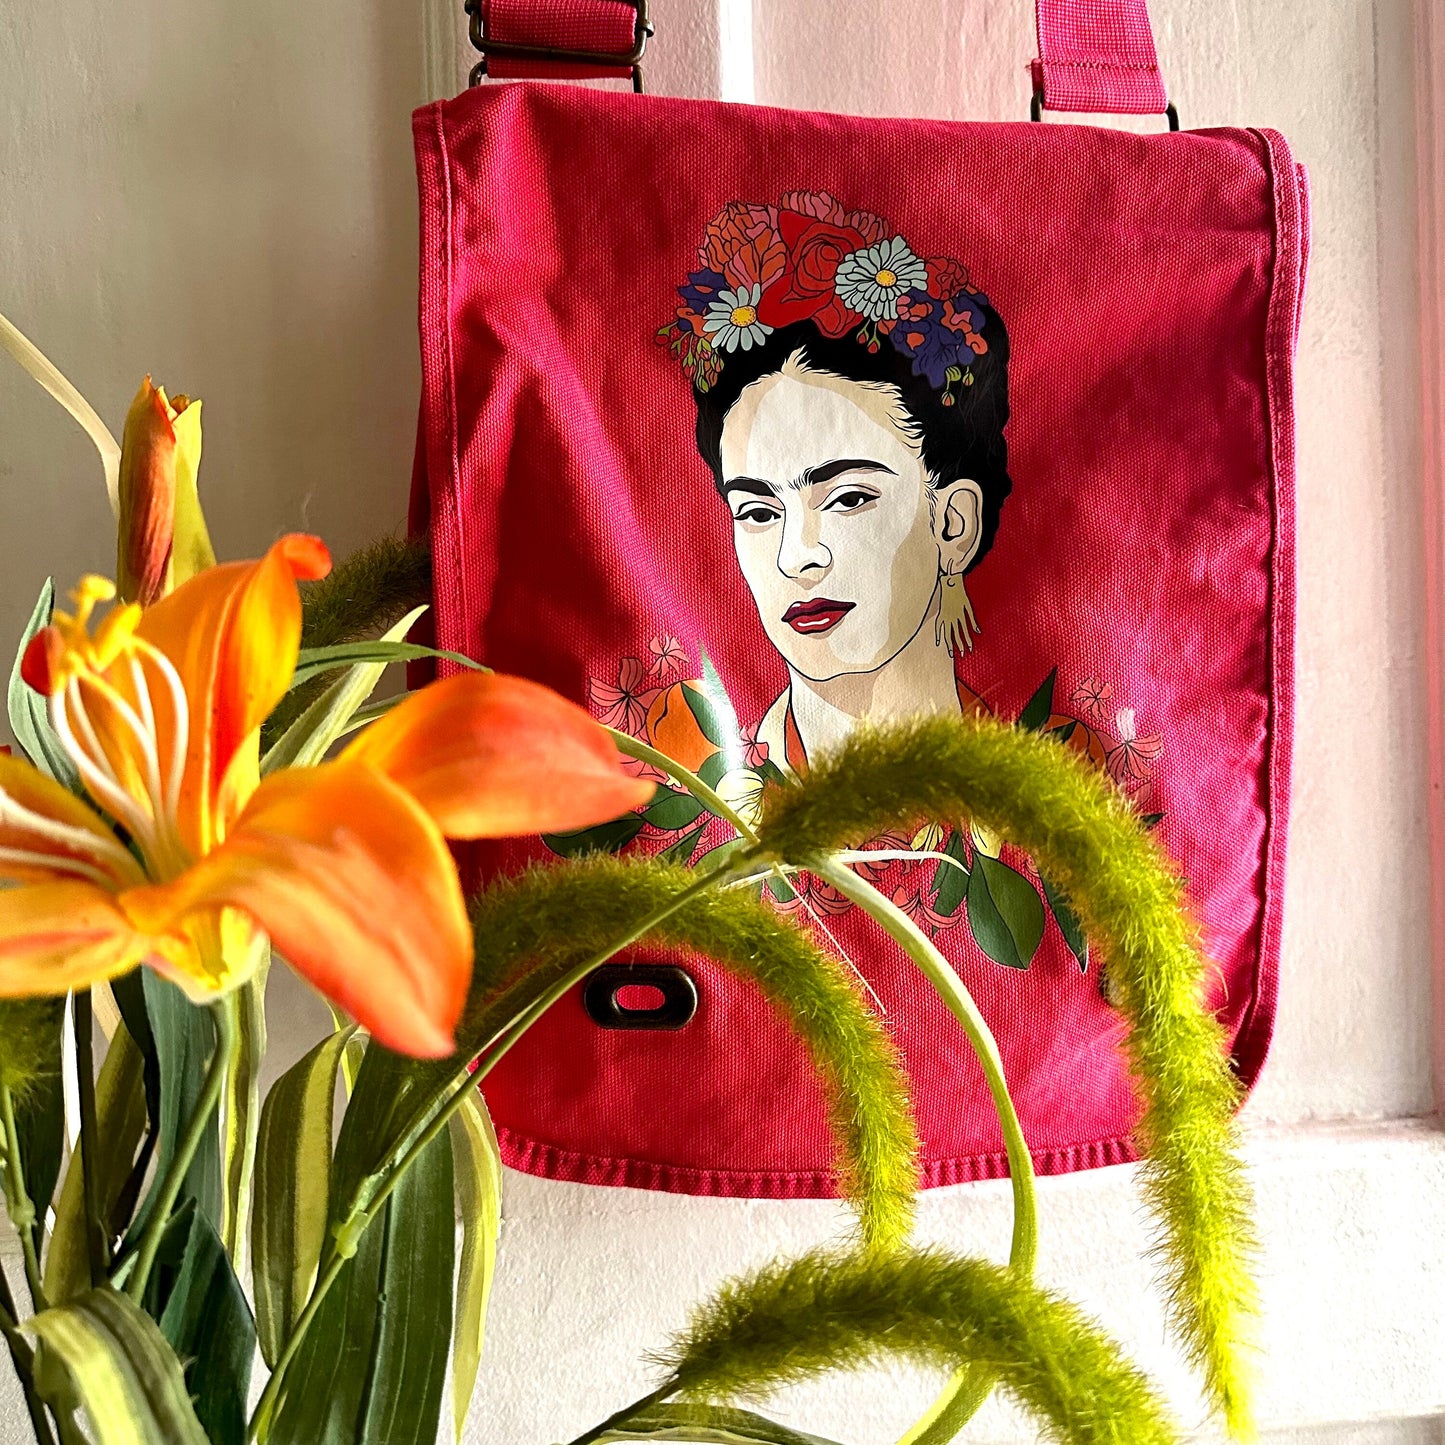 Glamorous Frida Inspired Bag Fuchsia Pink-Red Color Crossbody Shoulder Canvas Bag for Girls and Women Fridalovers Fashion Mother's Day Gift